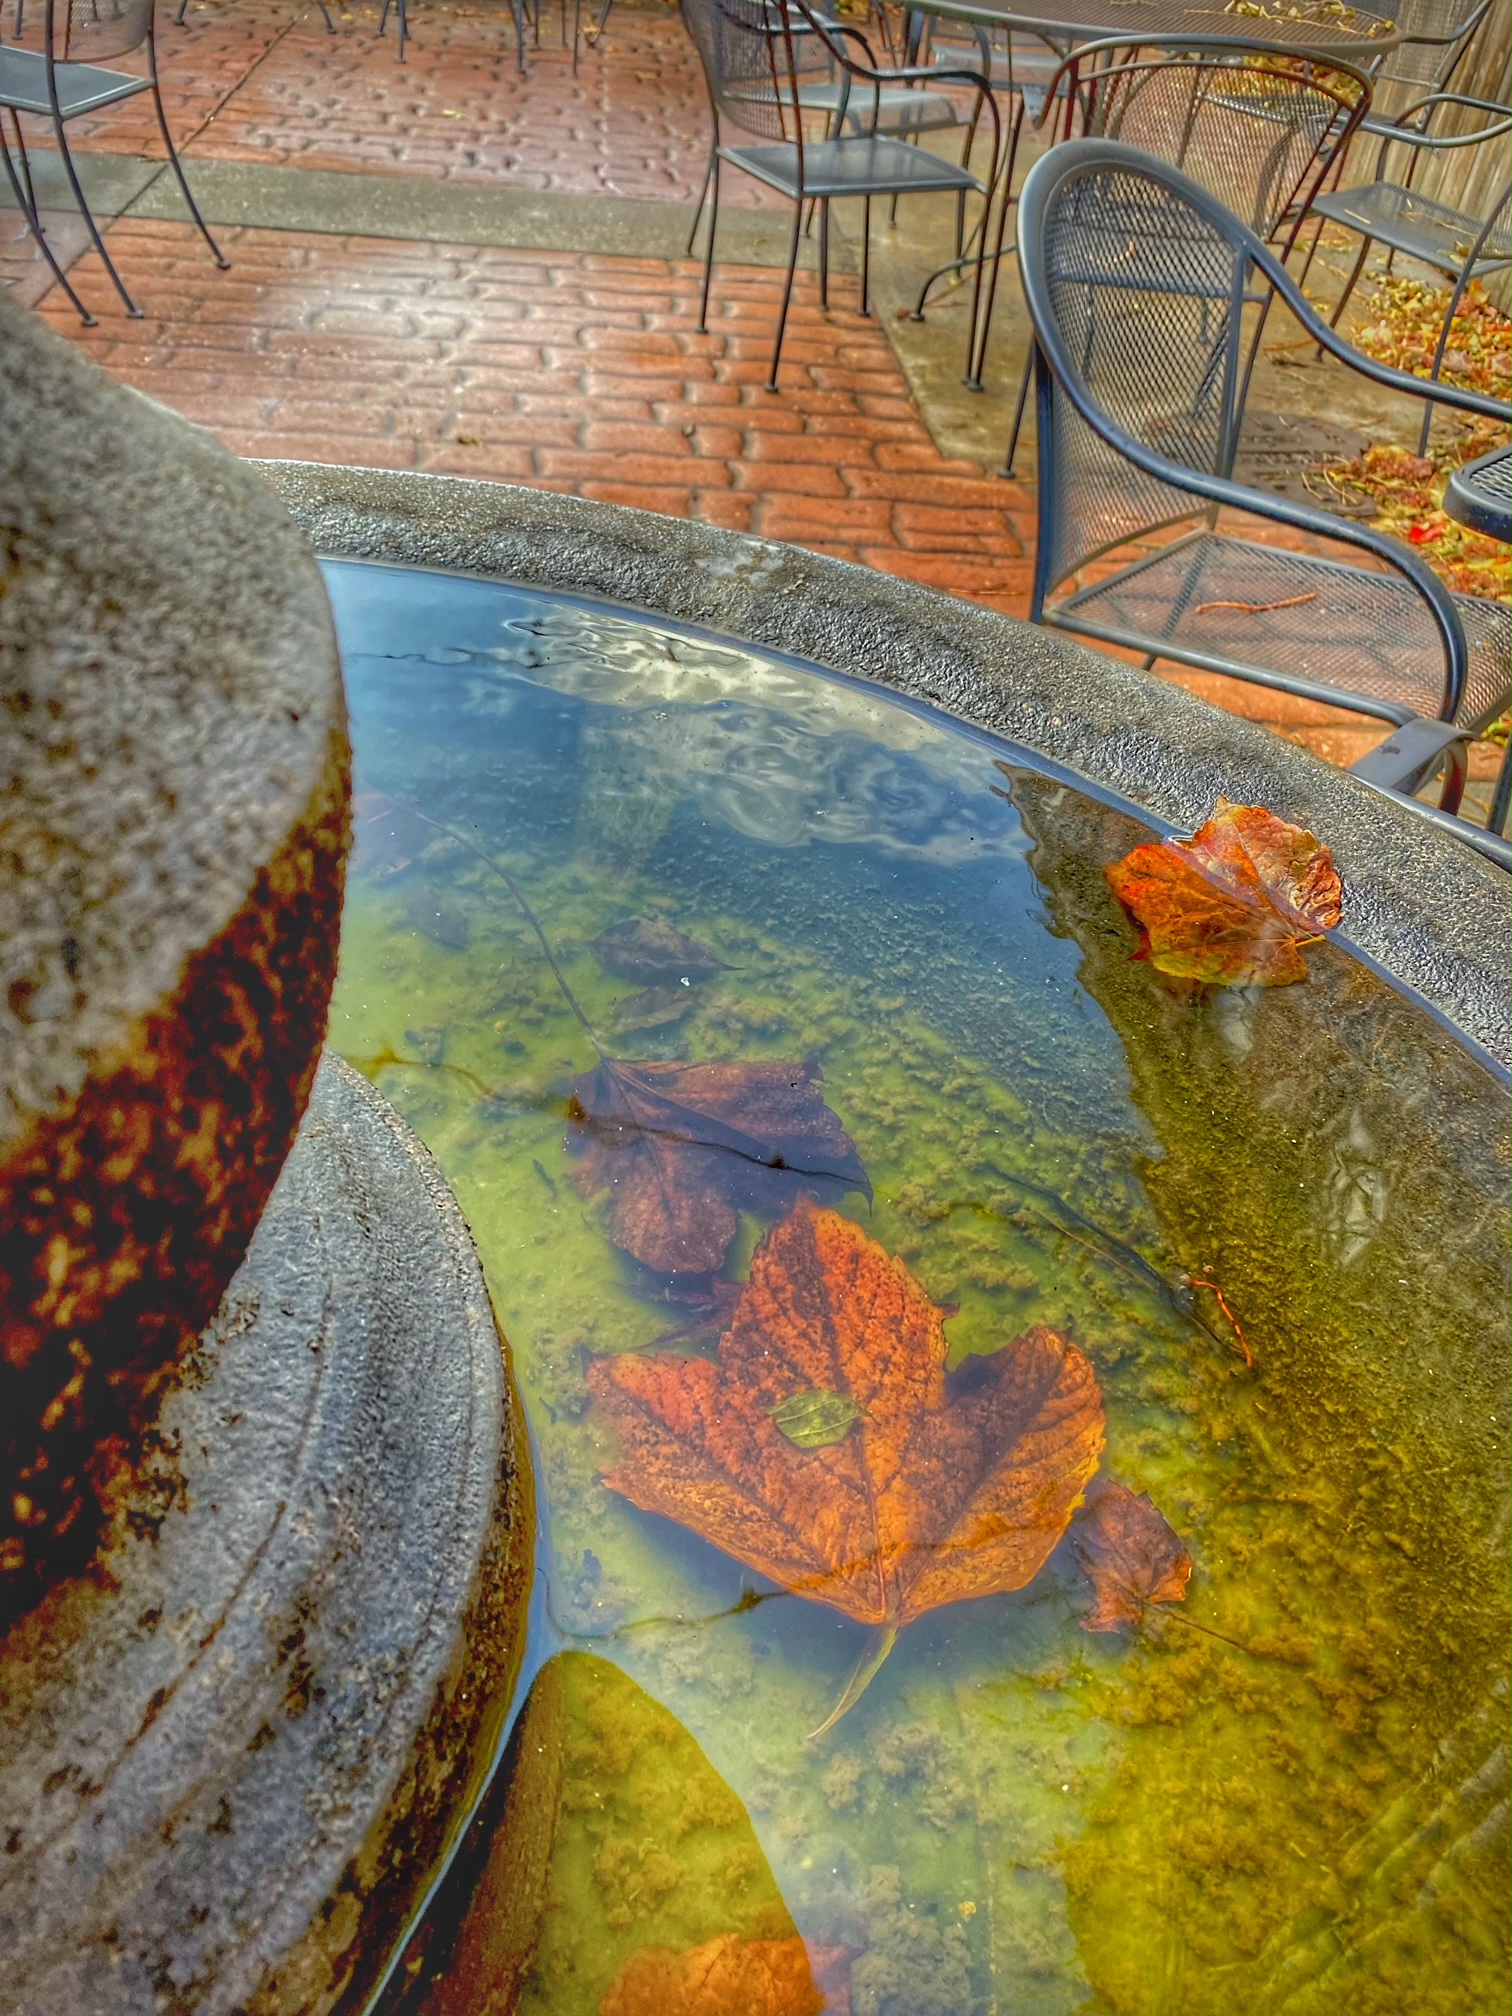 Autumn Reflections
Photography
8" X 12"
$95.